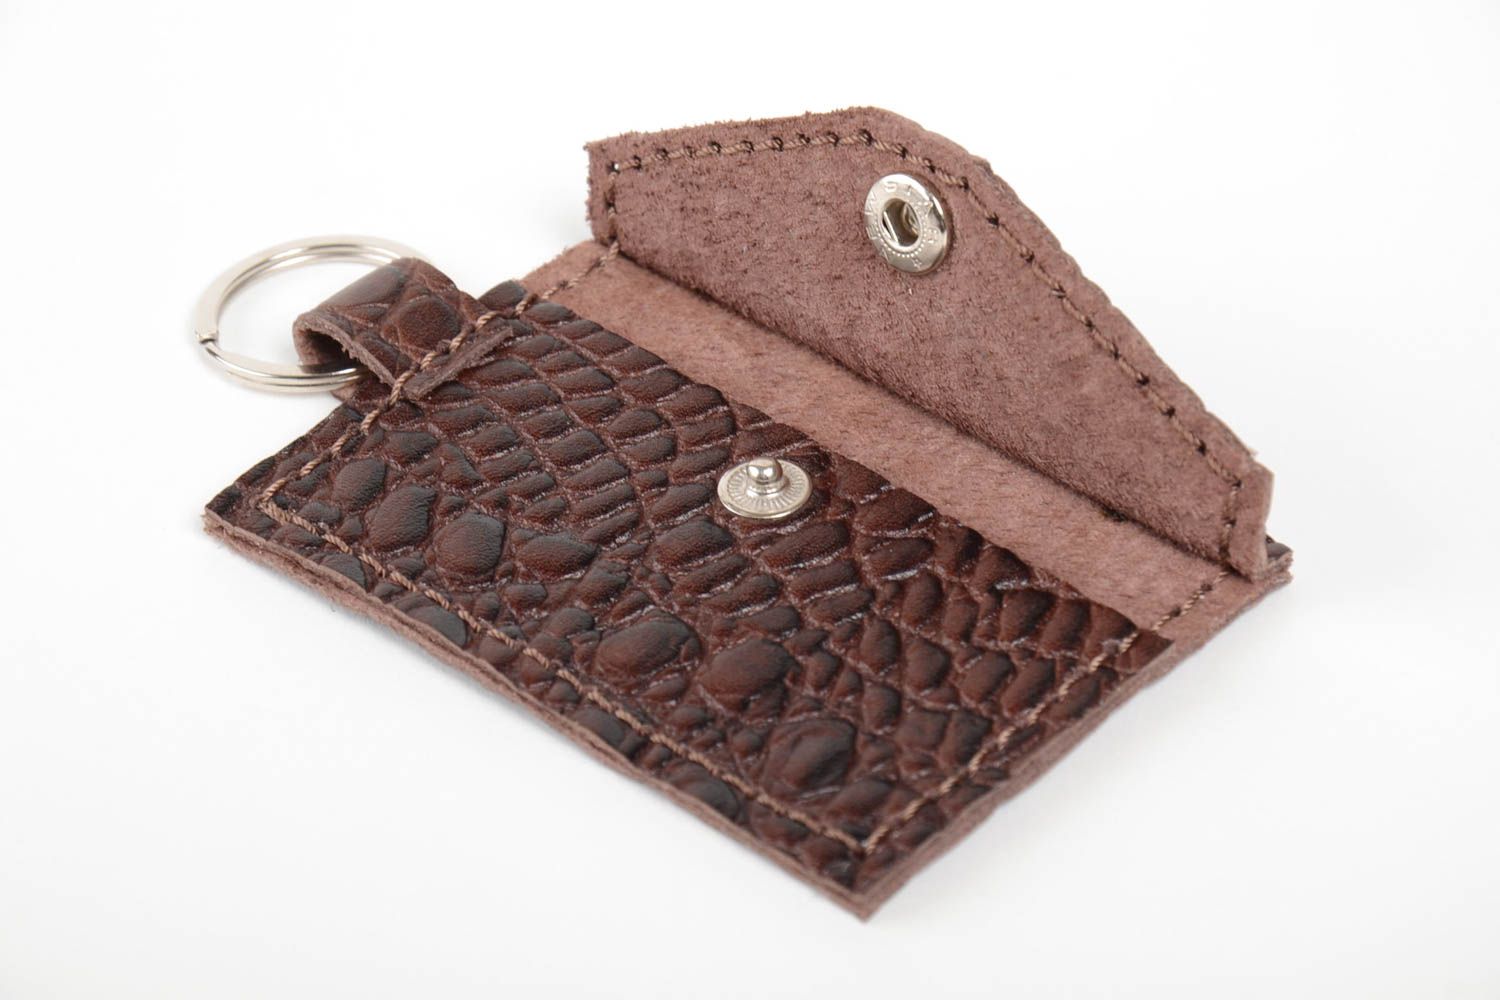 Handmade leather wallet leather key case leather goods presents for men photo 5